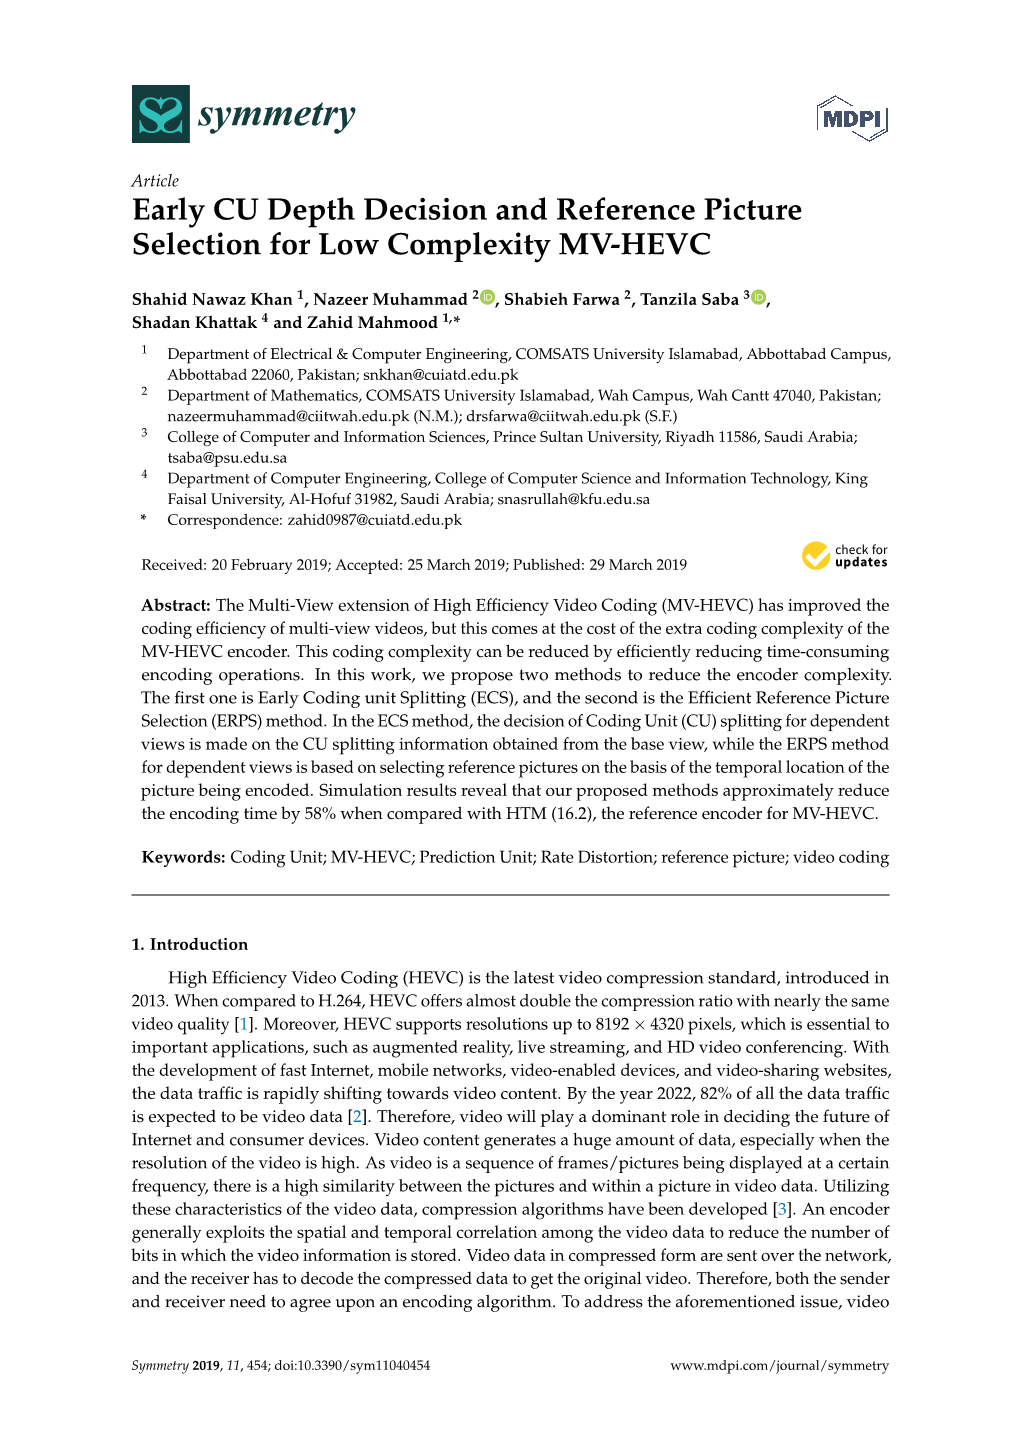 Early CU Depth Decision and Reference Picture Selection for Low Complexity MV-HEVC